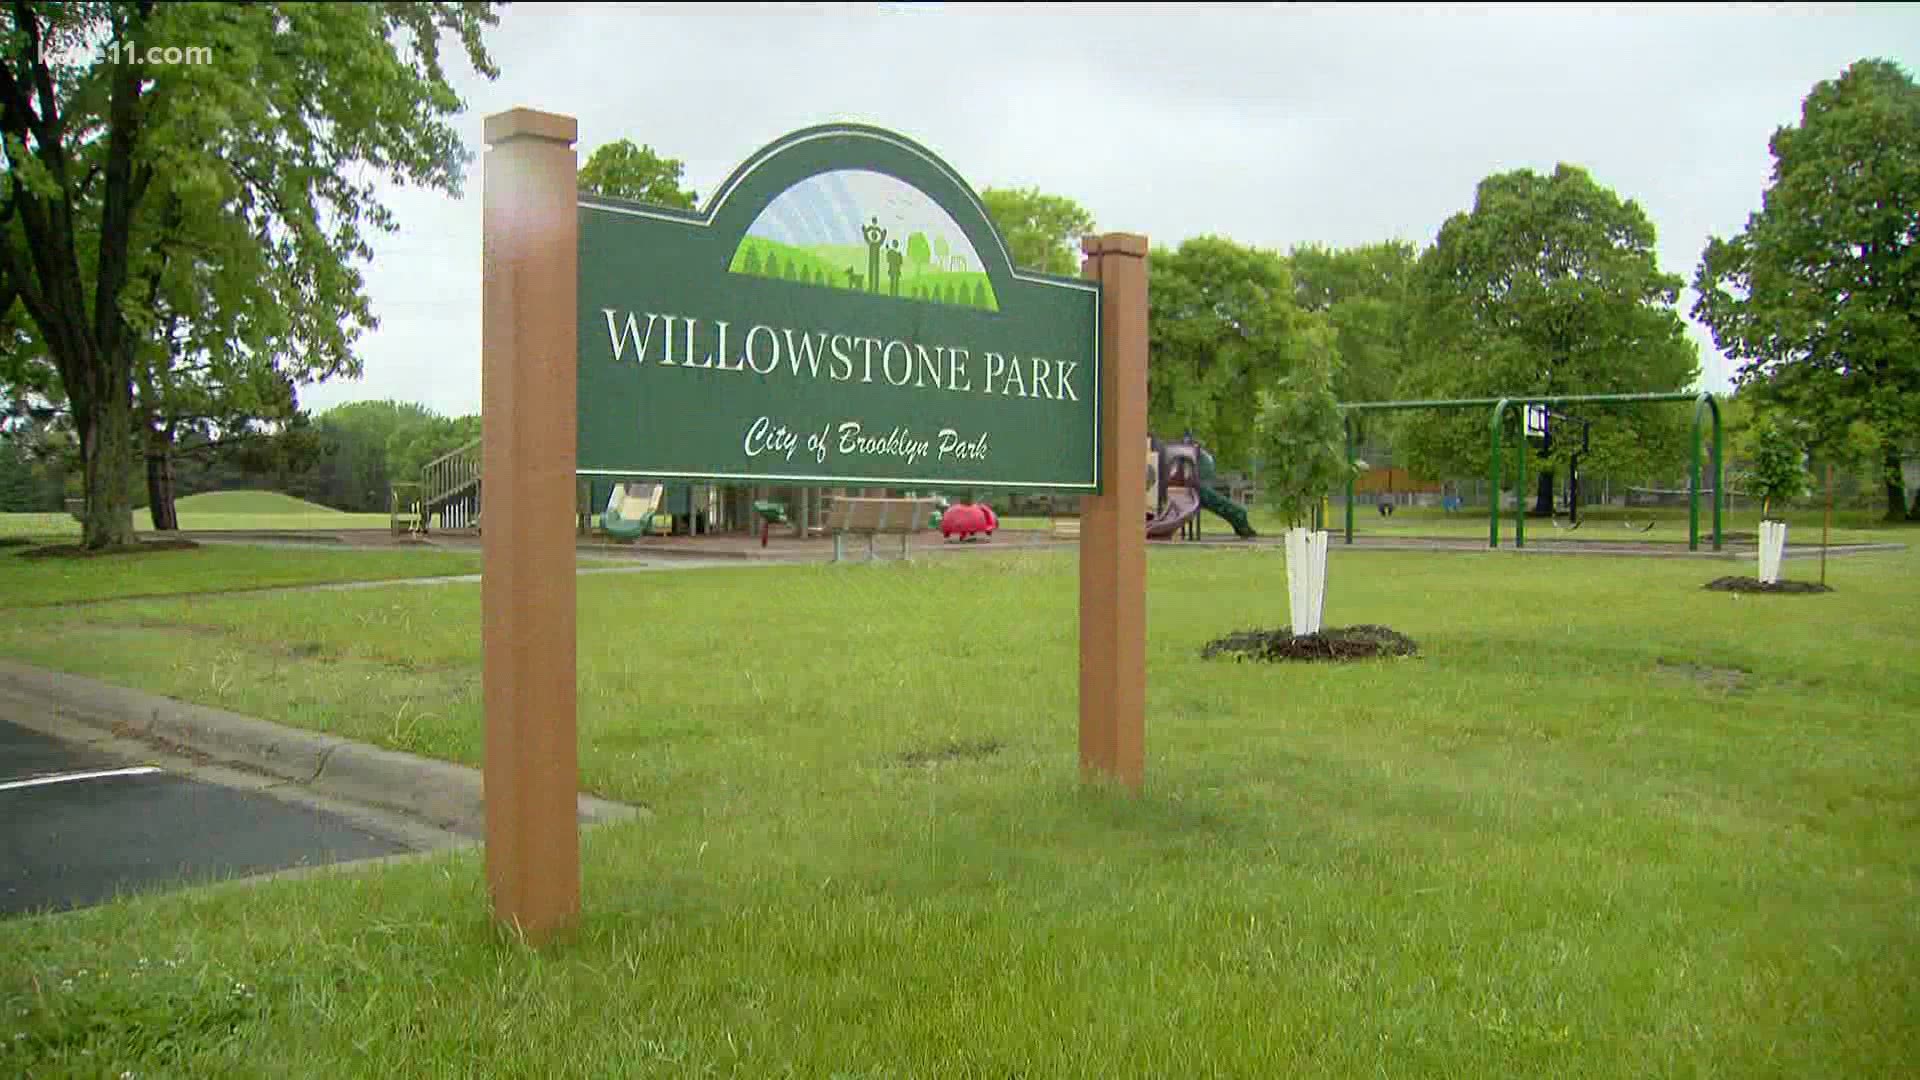 Police say the incident occurred at Willowstone Park, while the boy was attending a family gathering.